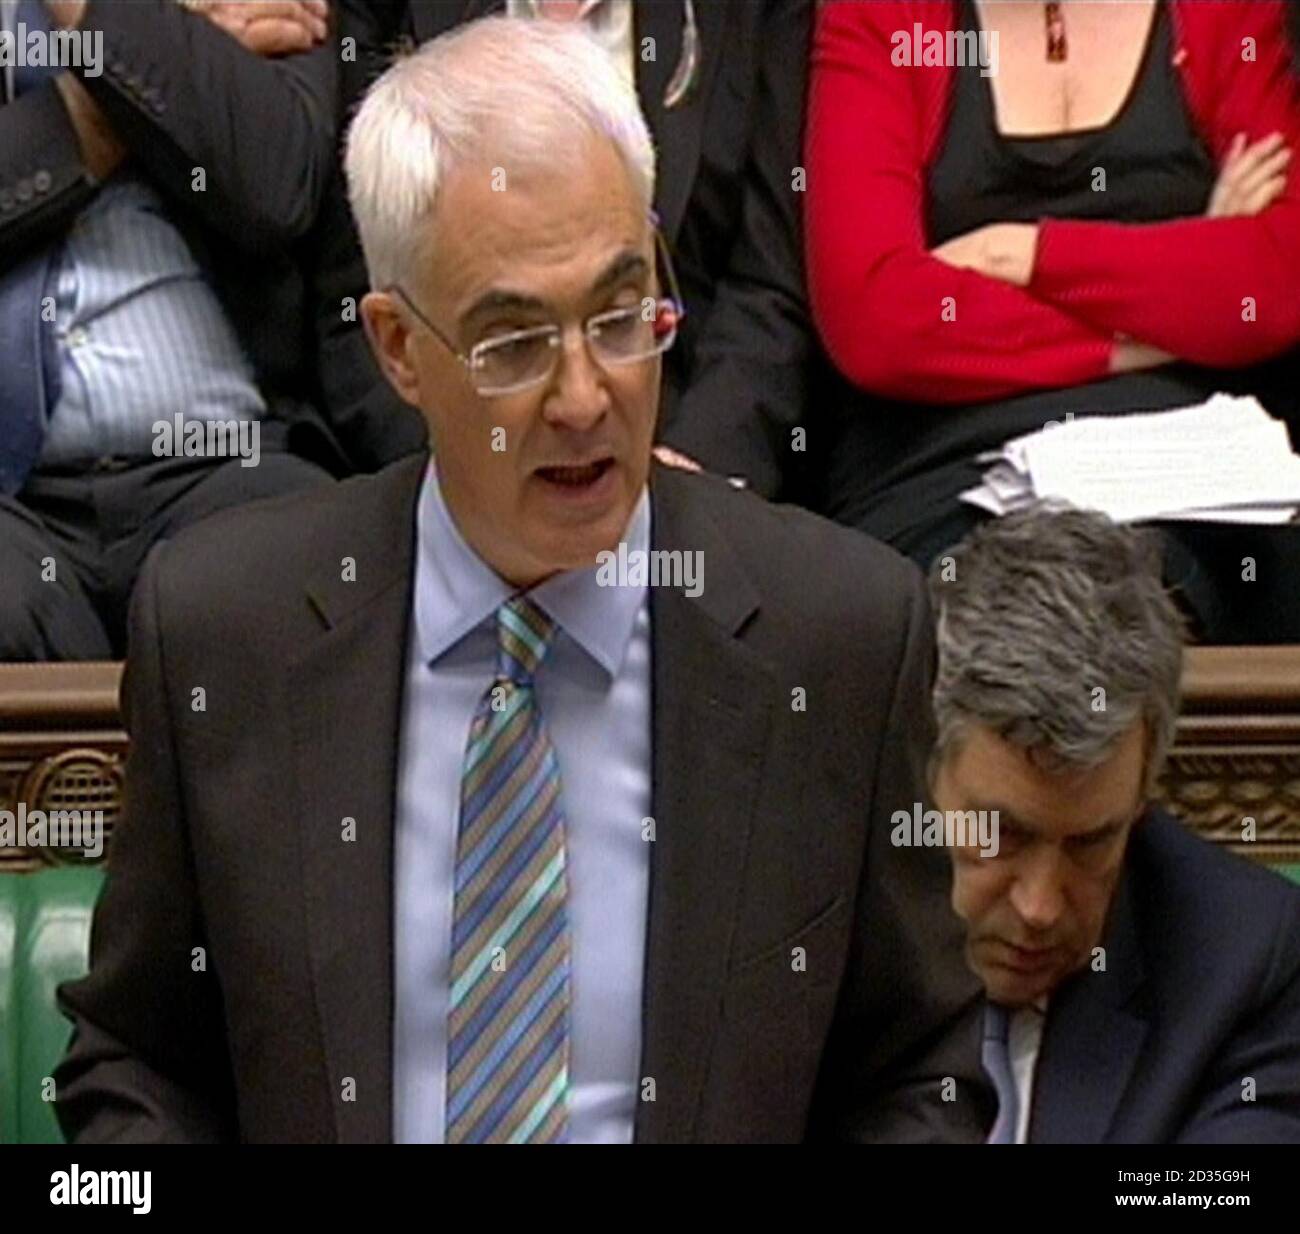 Chancellor of the Exchequer Alistair Darling delivers his Budget speech in the House of Commons, London. Stock Photo